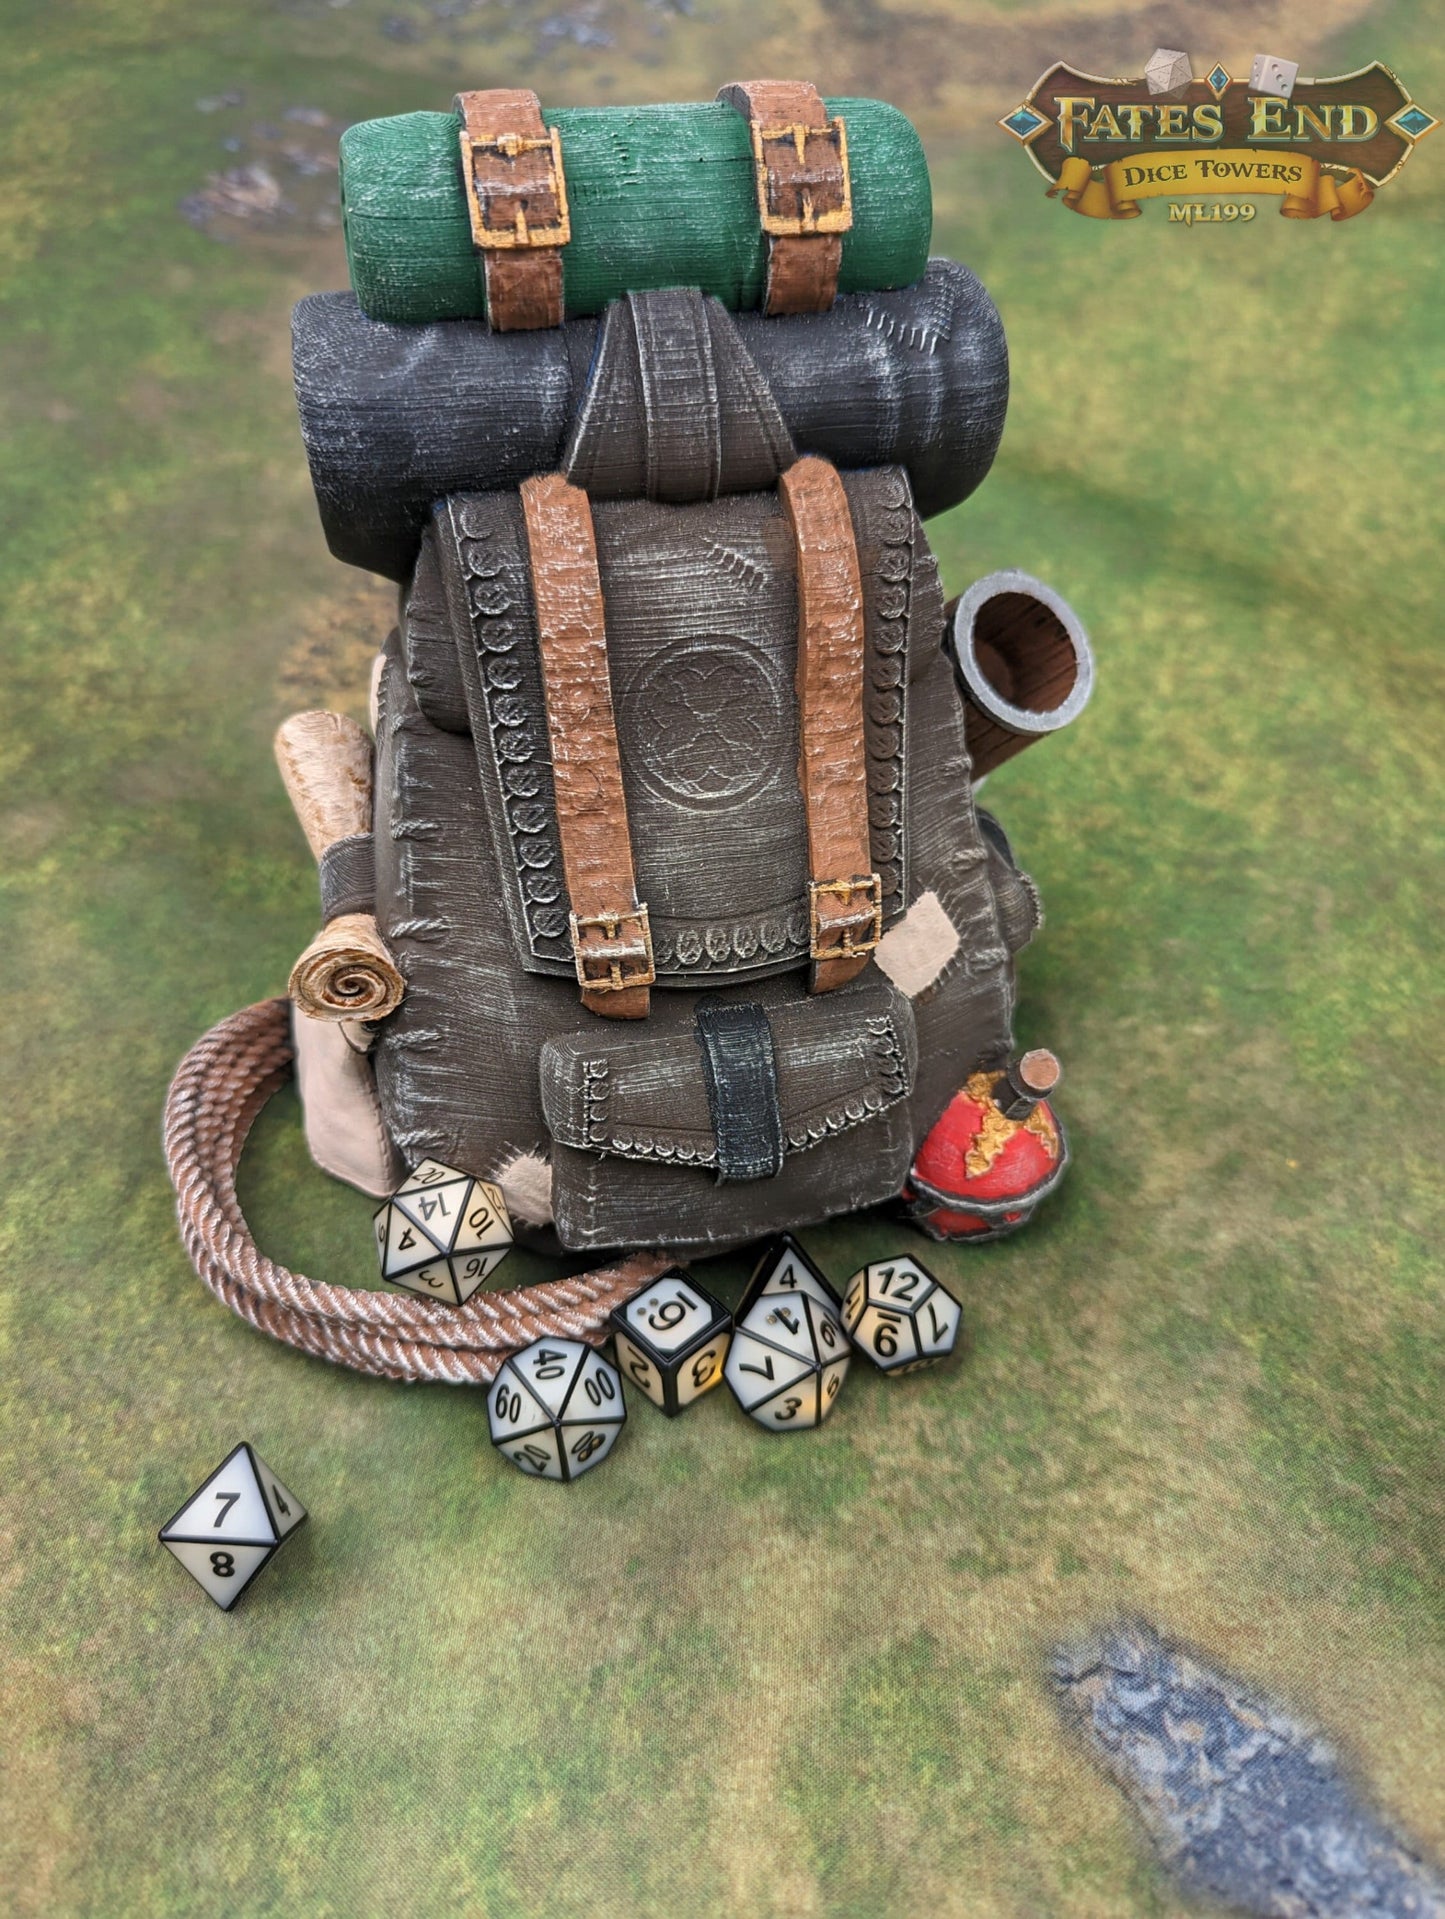 Ranger Back Pack 3D Printed Dice Tower - Fate's End Collection | Dice Tray | D20 Dice Vault - Adventure Time!